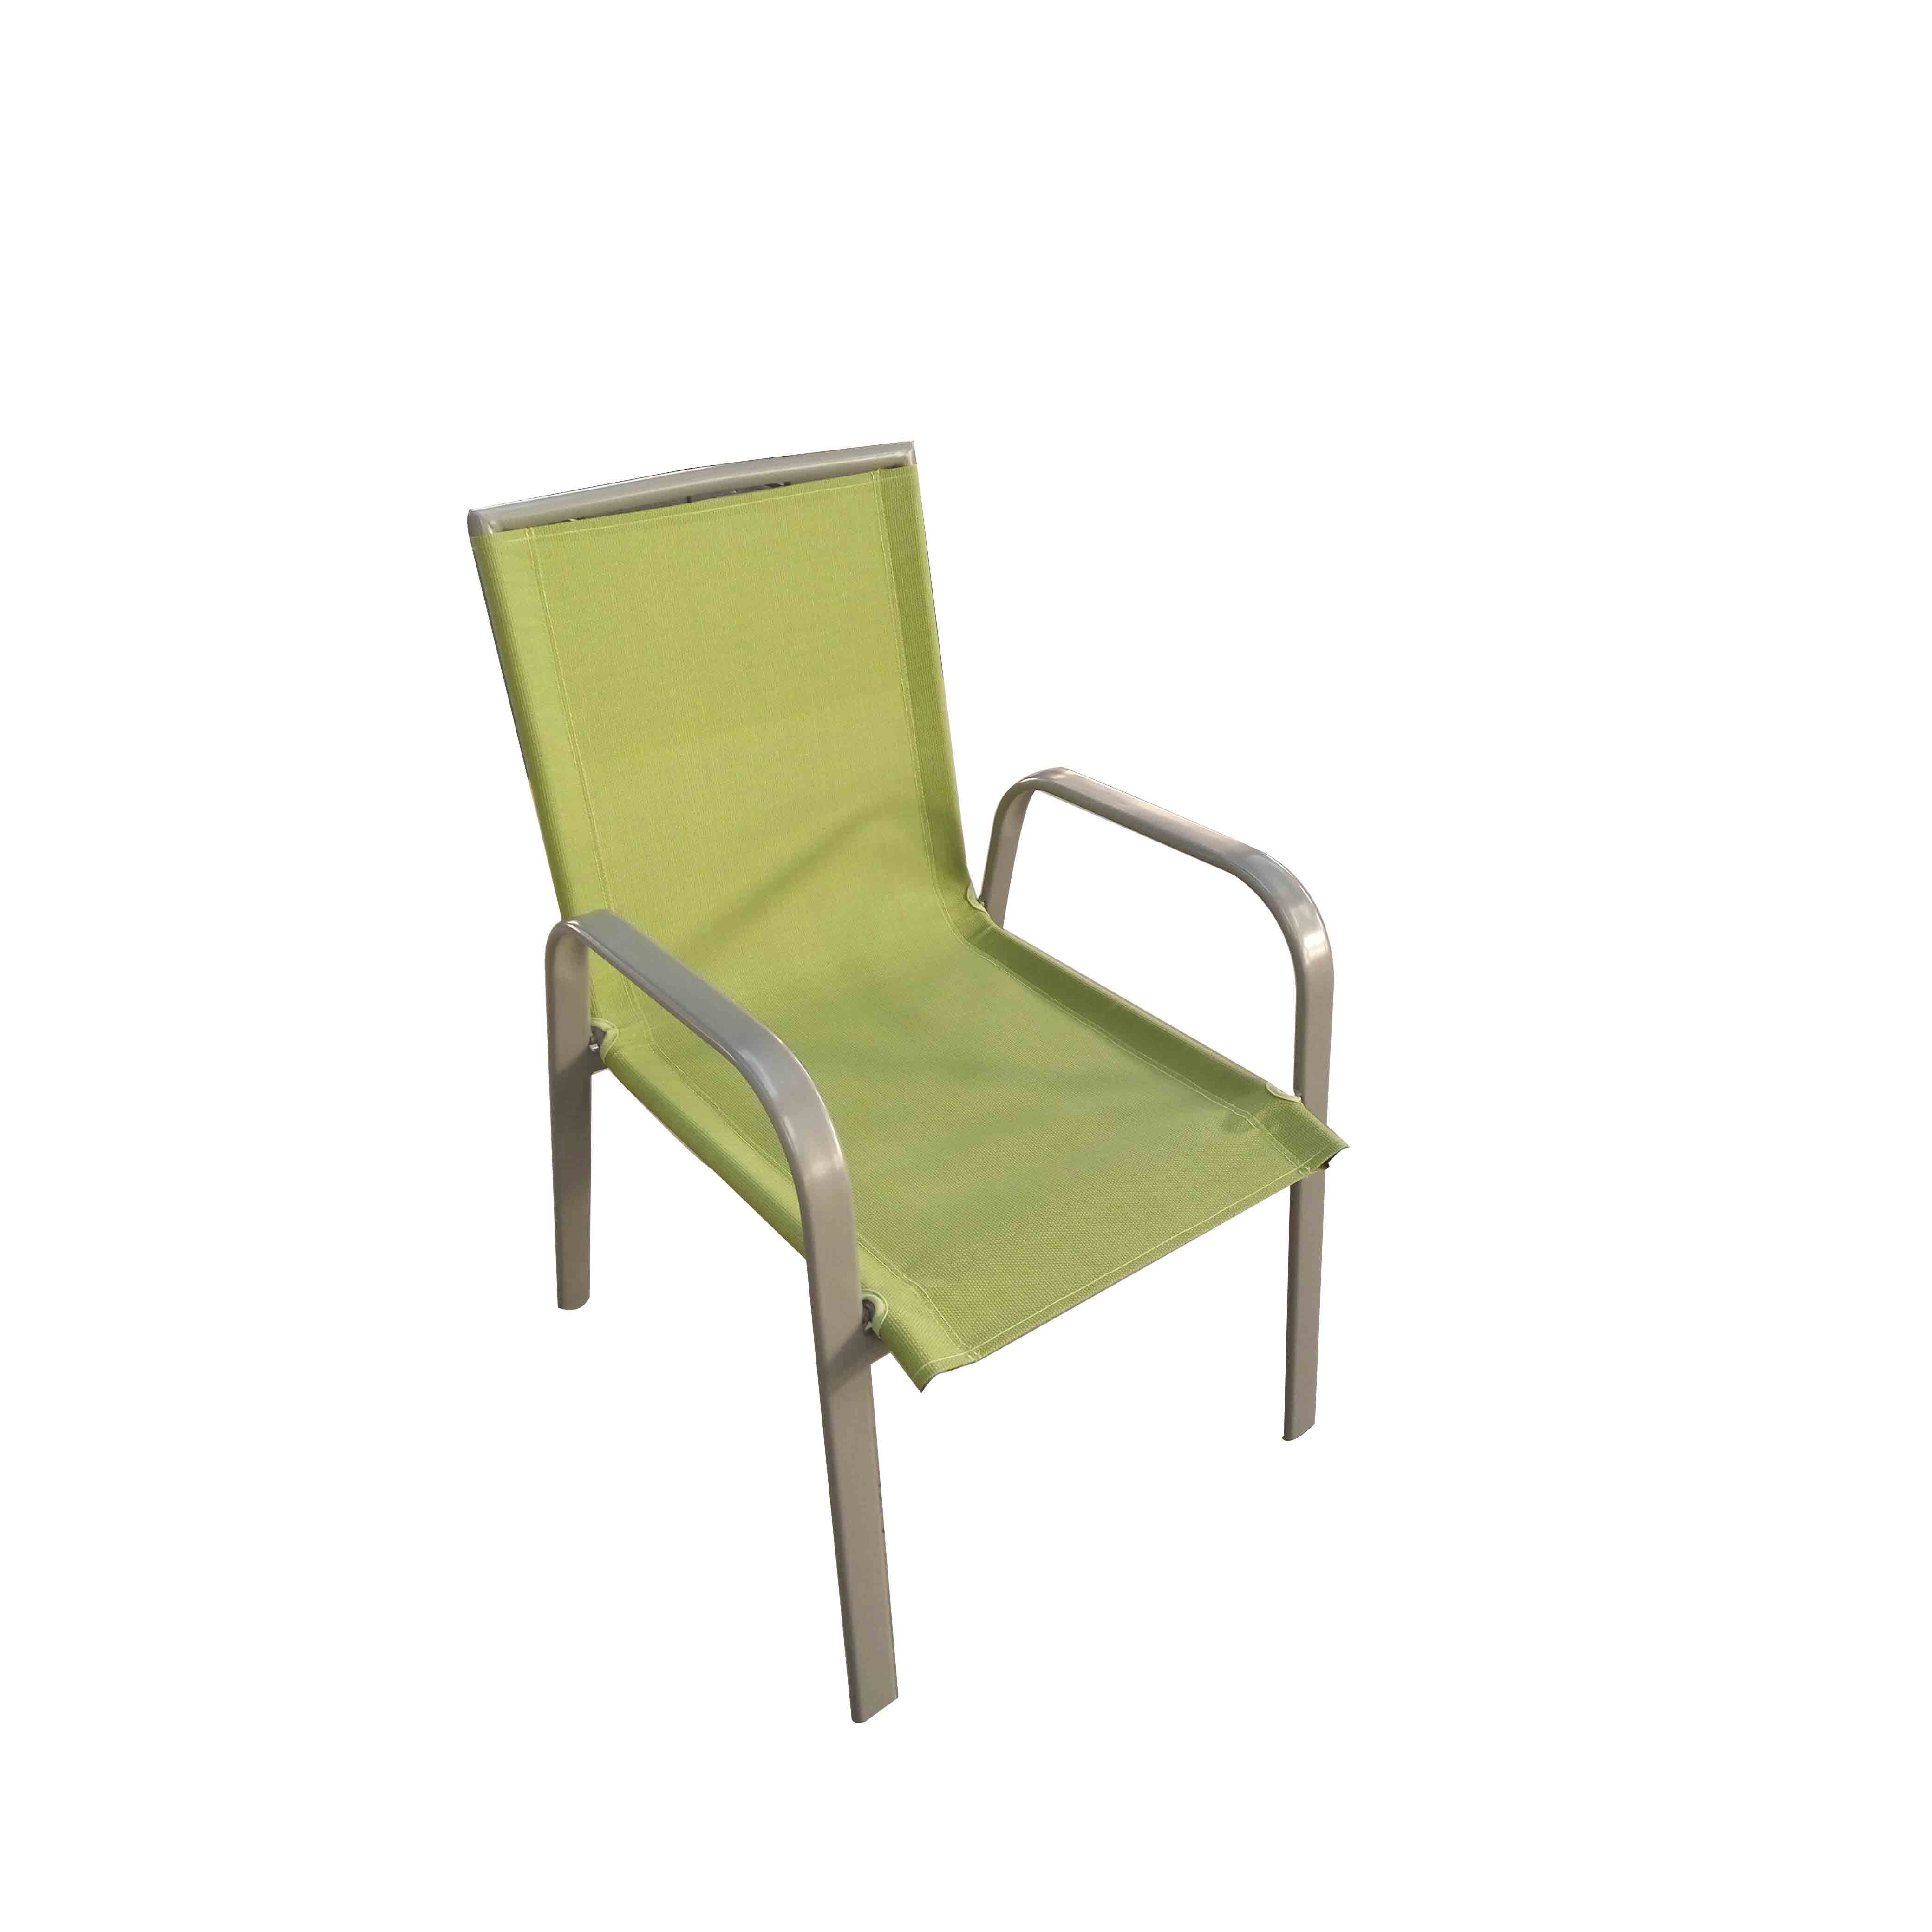 JJ302C-Pear Kid’s steel textilene stacking chair Featured Image